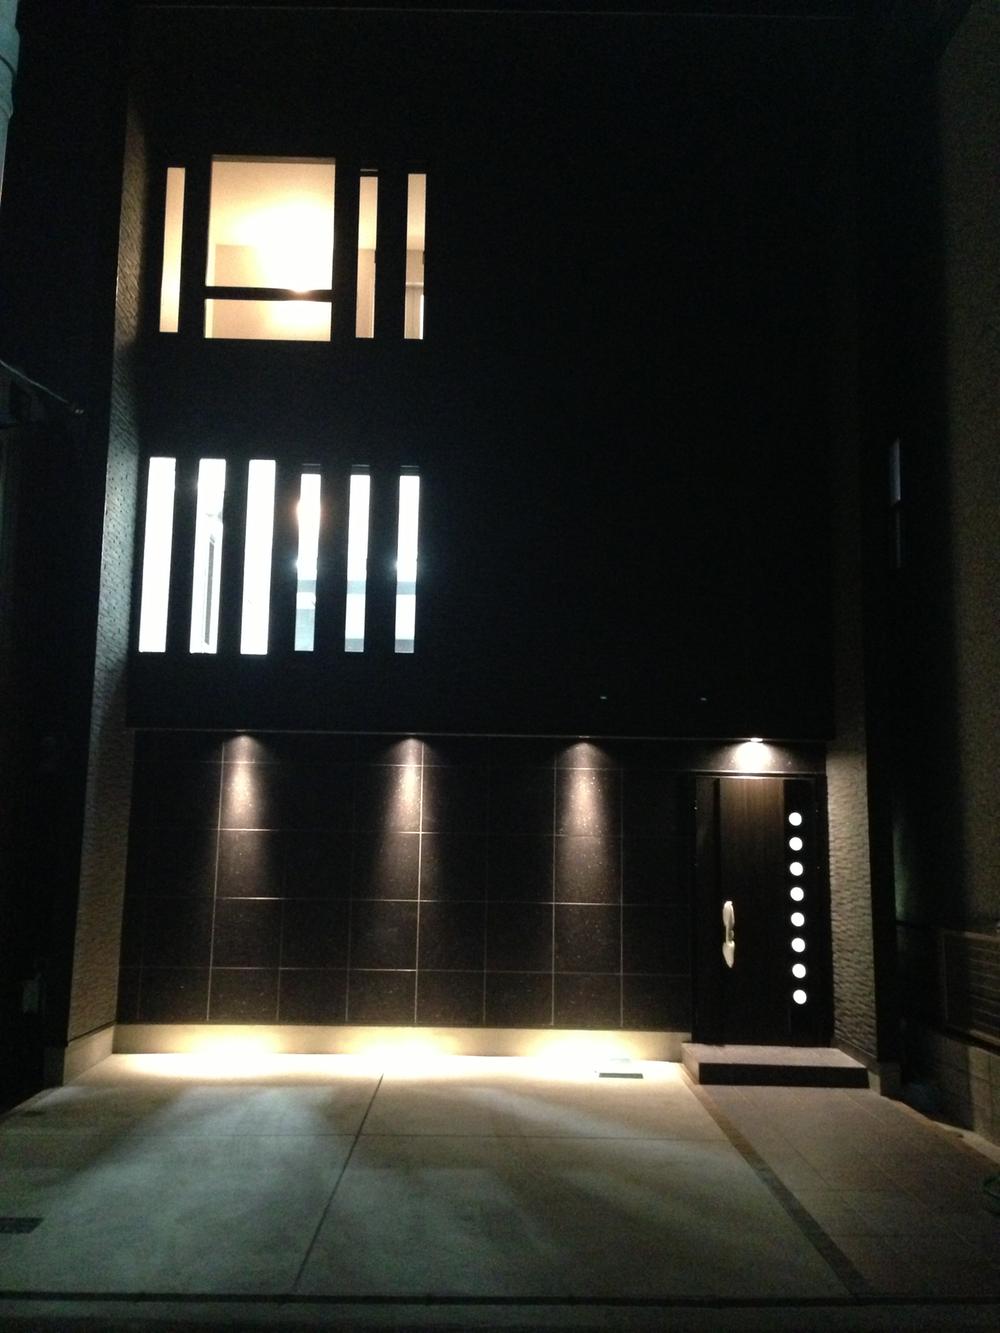 Model house photo. Model house indoor LED Down Light ・ illumination, Large number comes with 50 or more